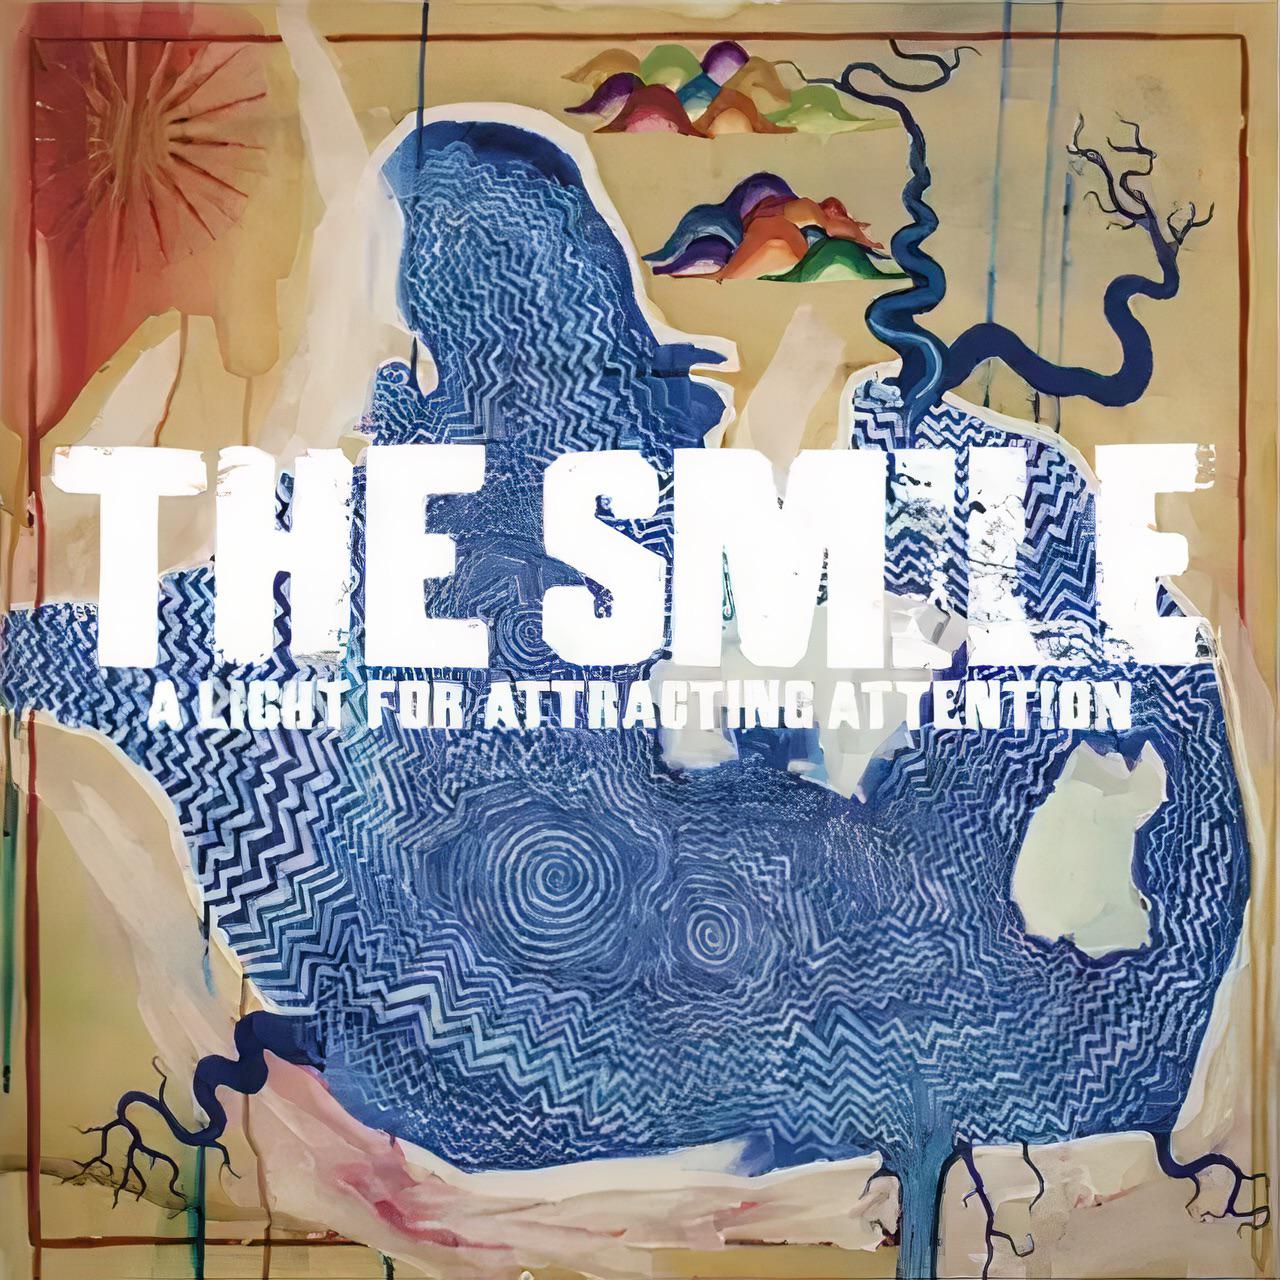 The Smile — A Light for Attracting Attention cover artwork